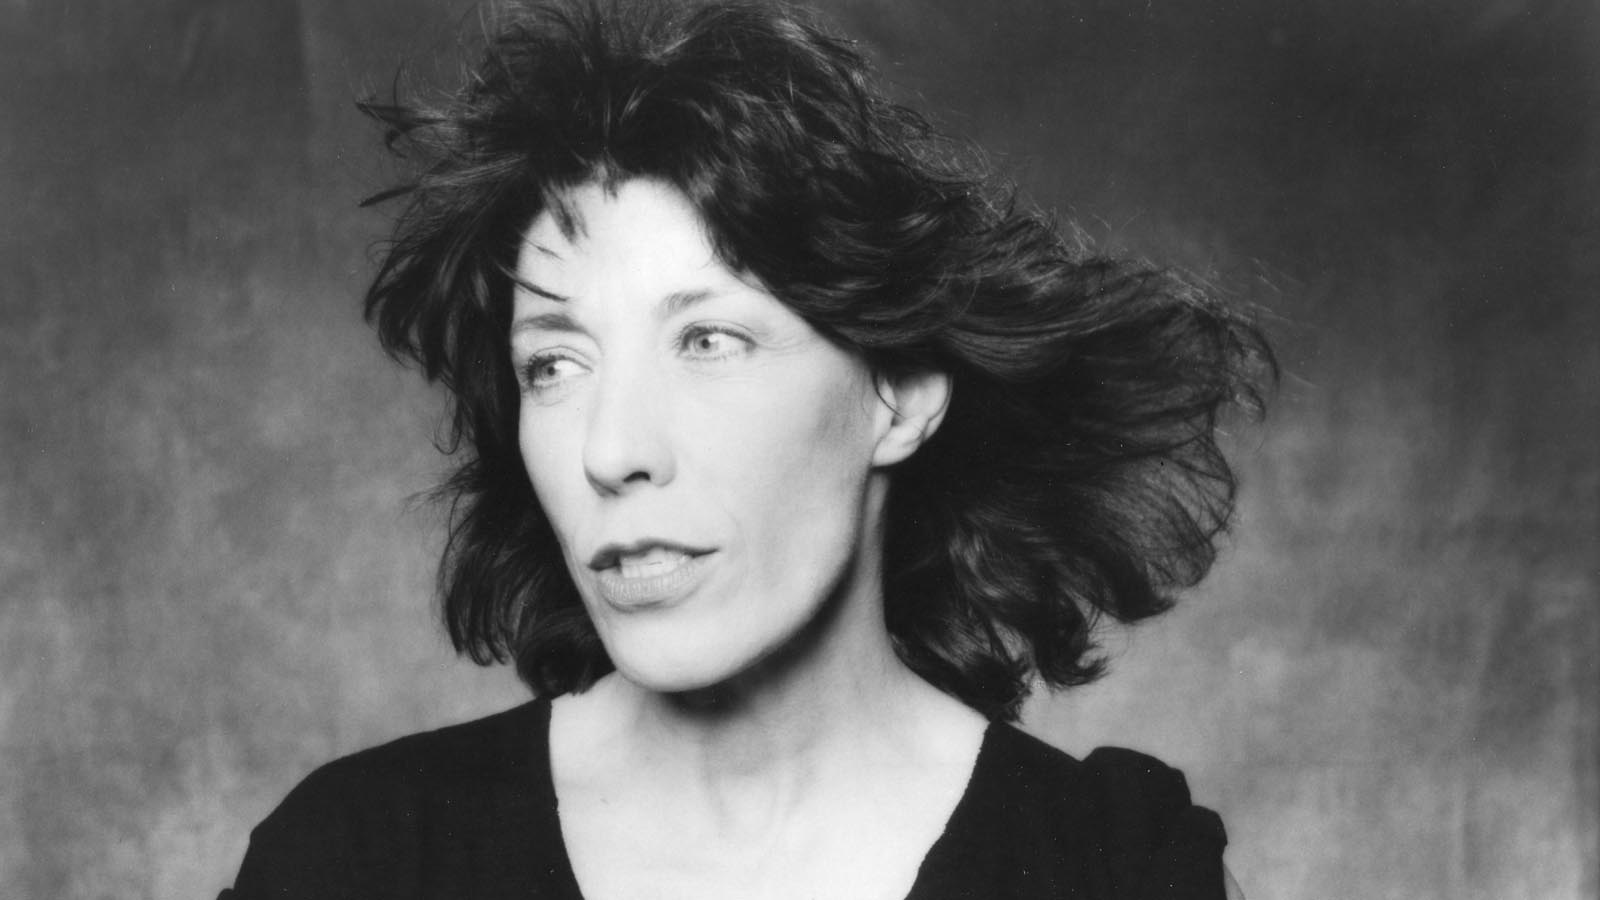 Tomlin pictures lily young Lily Tomlin